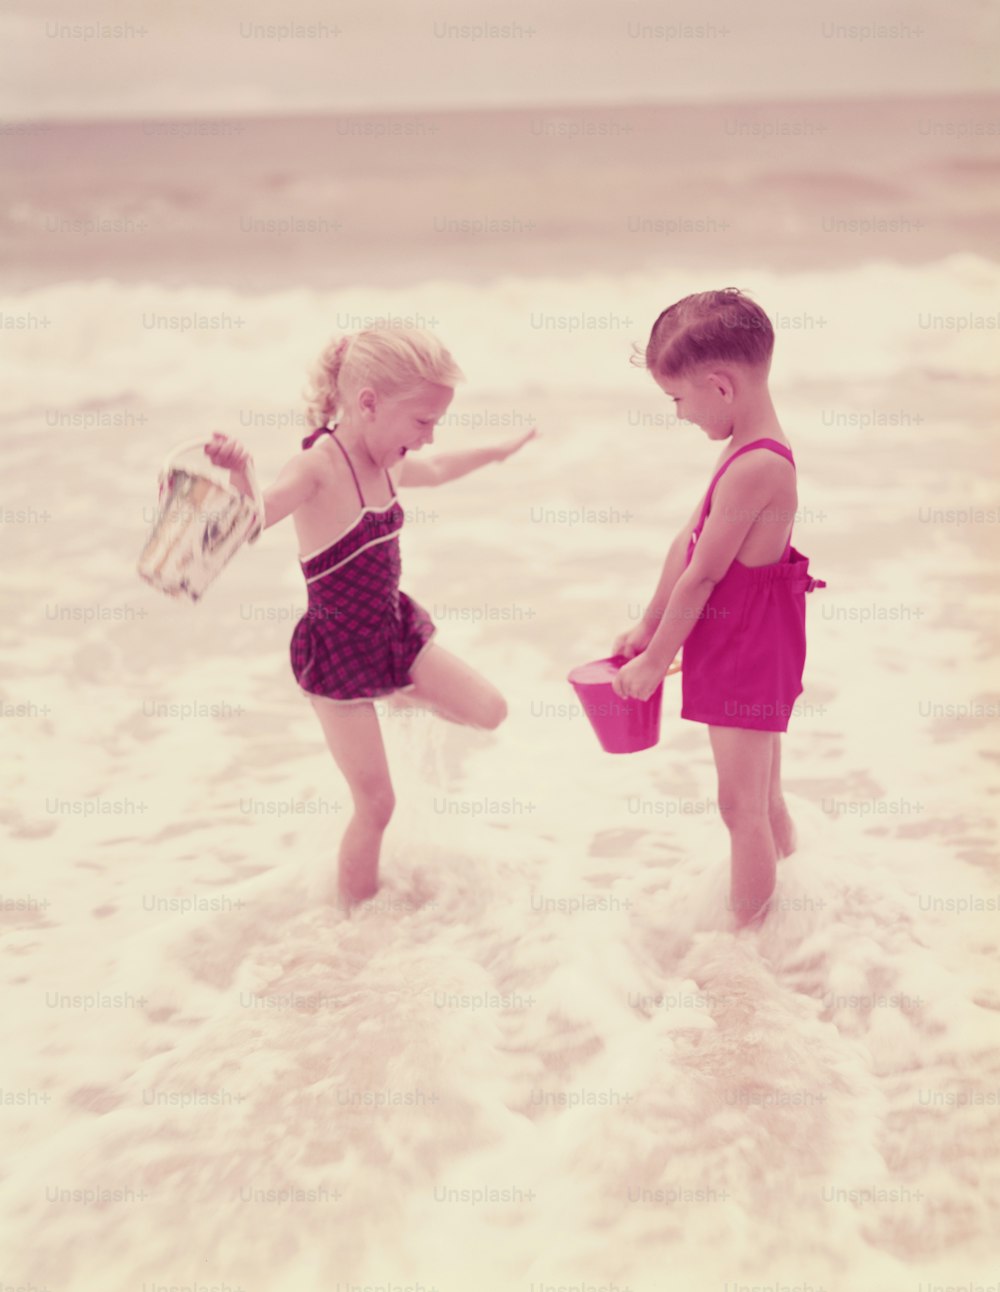 UNITED STATES - CIRCA 1950s:  Boy and girl playing in ocean surf.